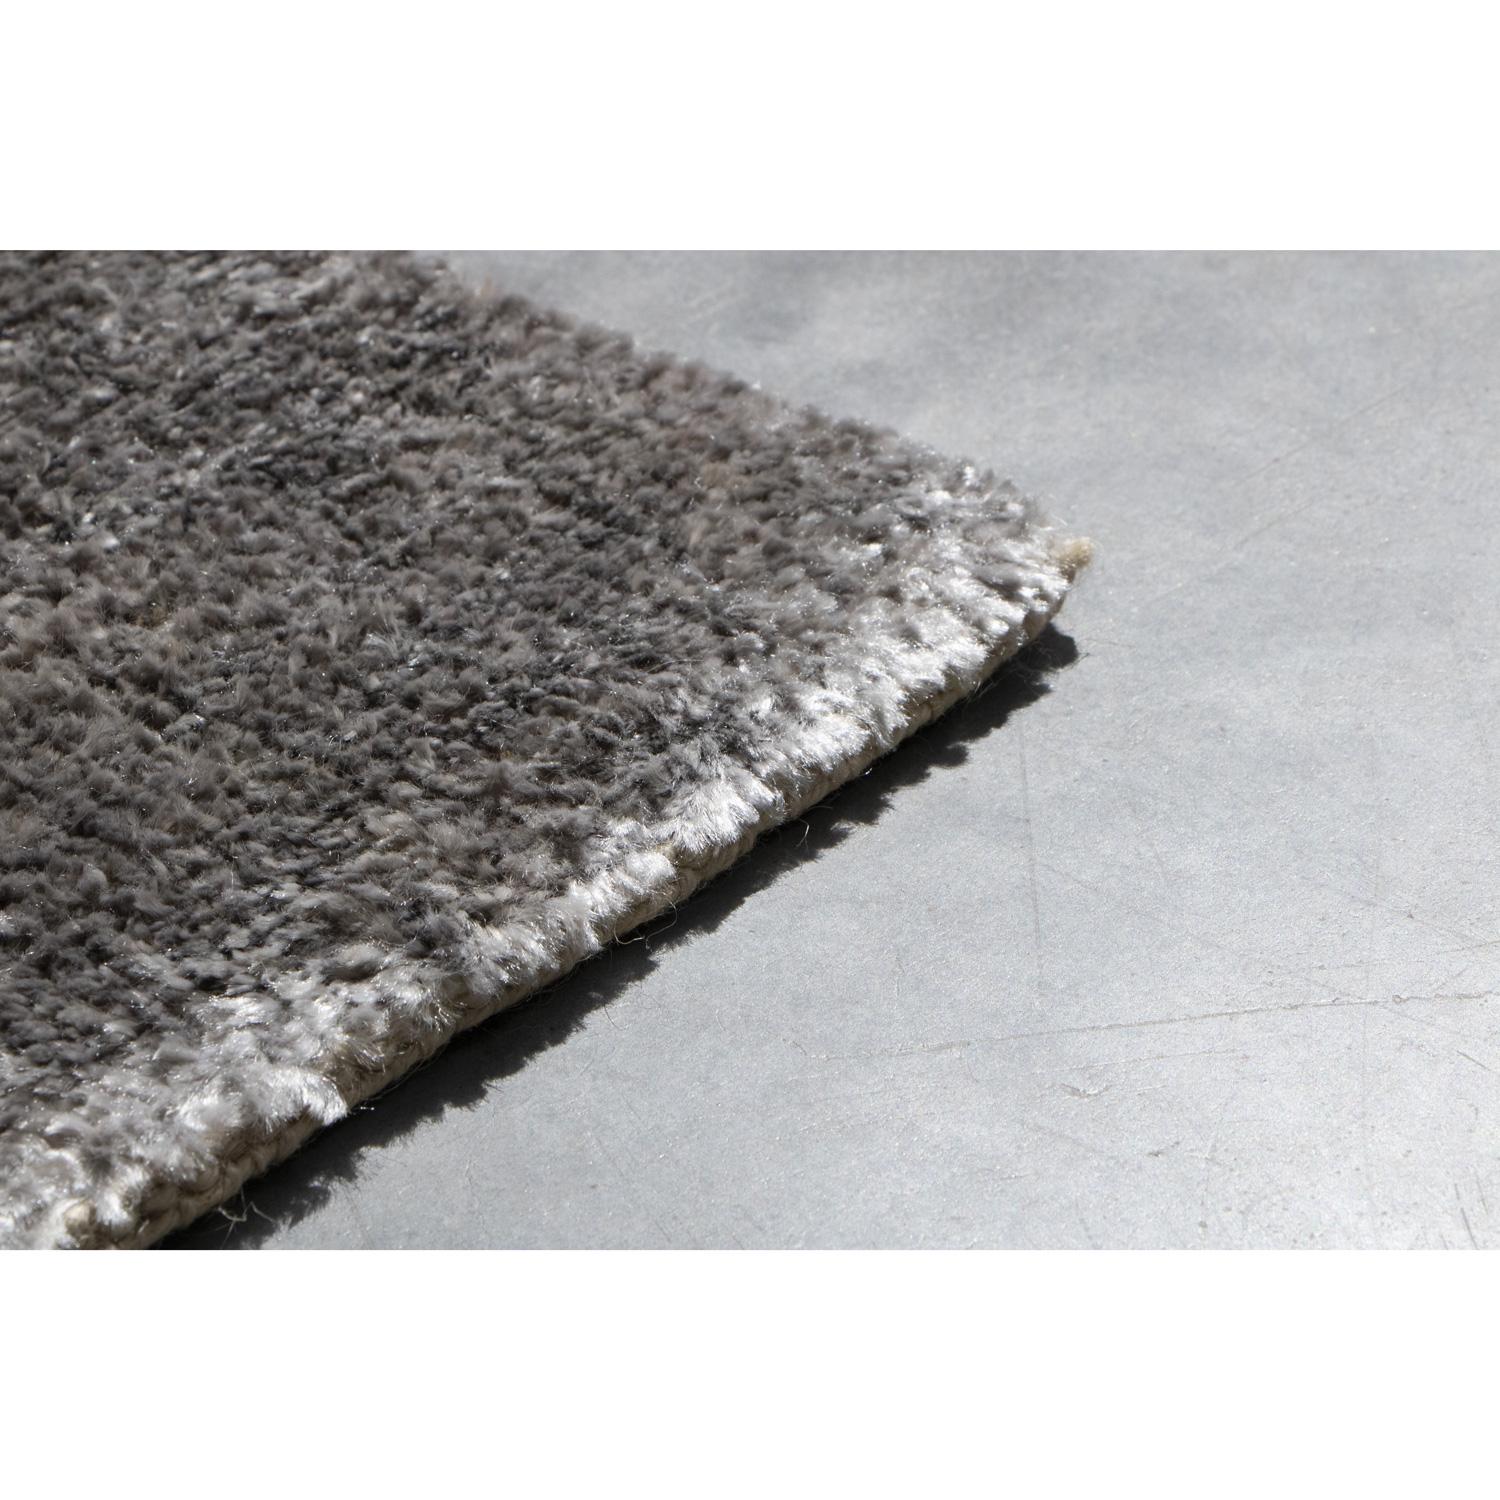 Hand-Woven 21st Cent Luxury Shiny Velvety Silvery Rug by Deanna Comellini In Stock 60x120cm For Sale